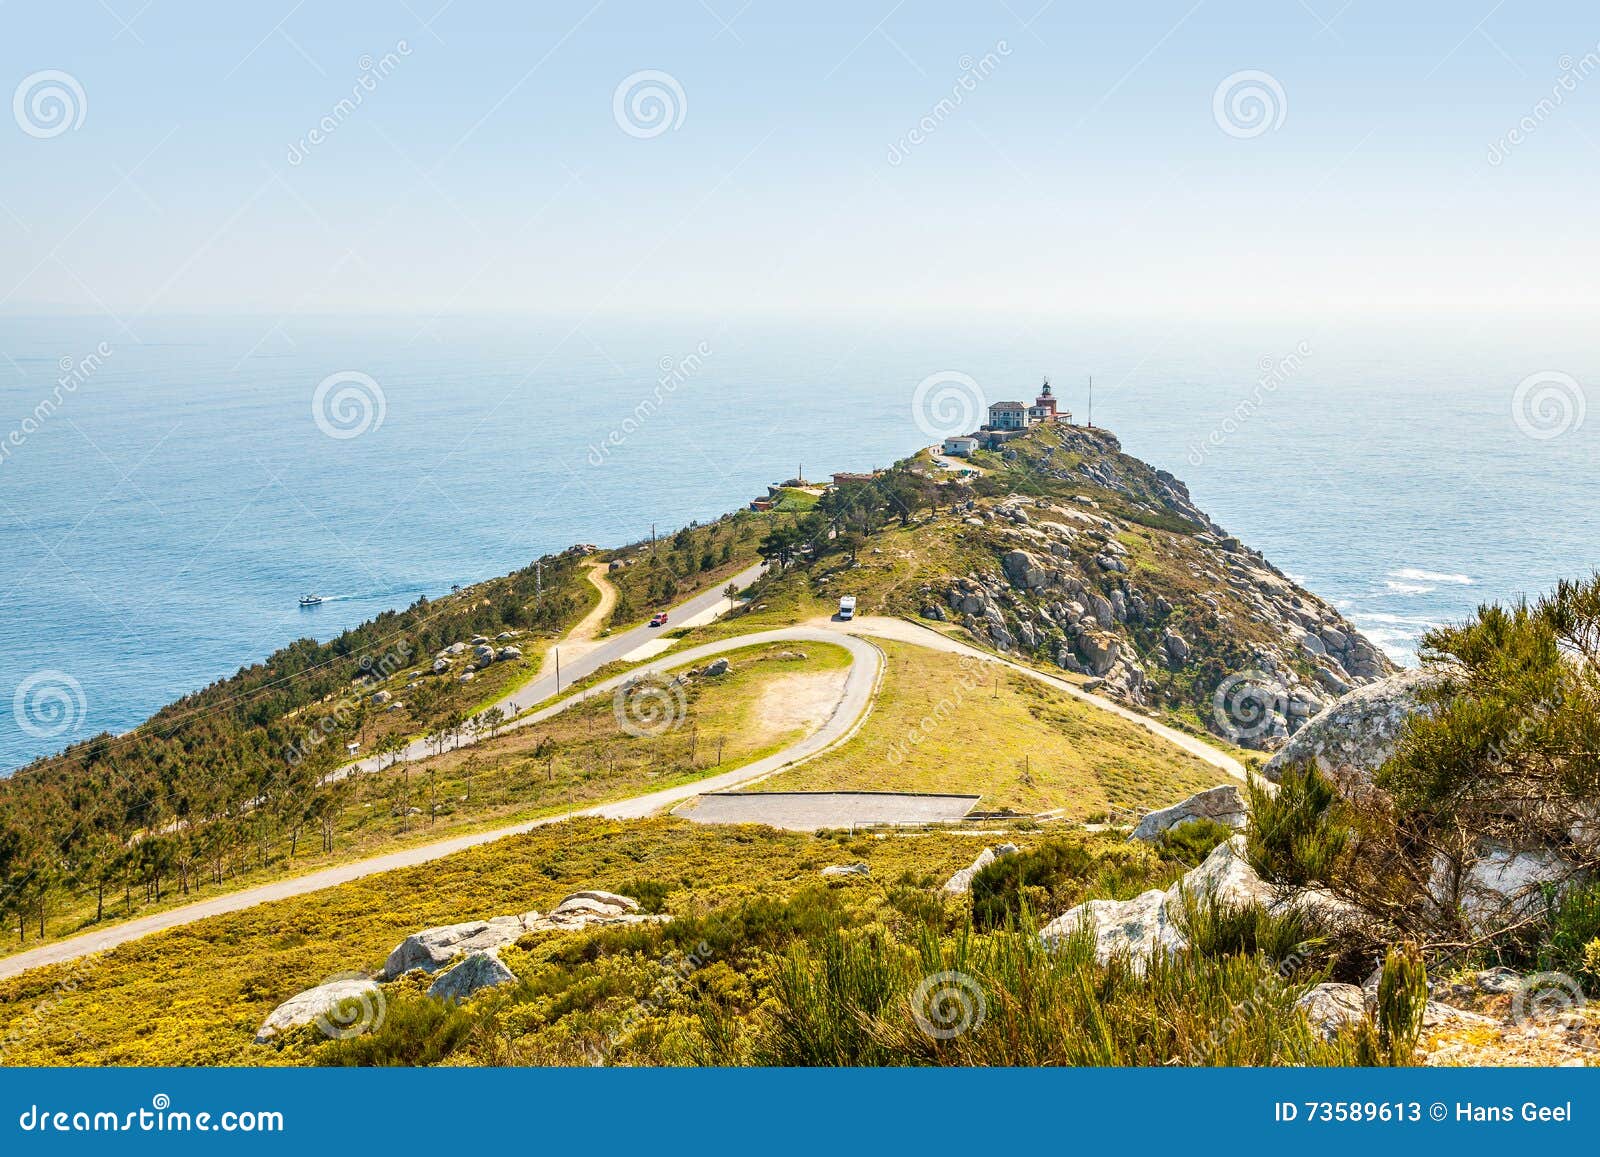 view of cape finisterre